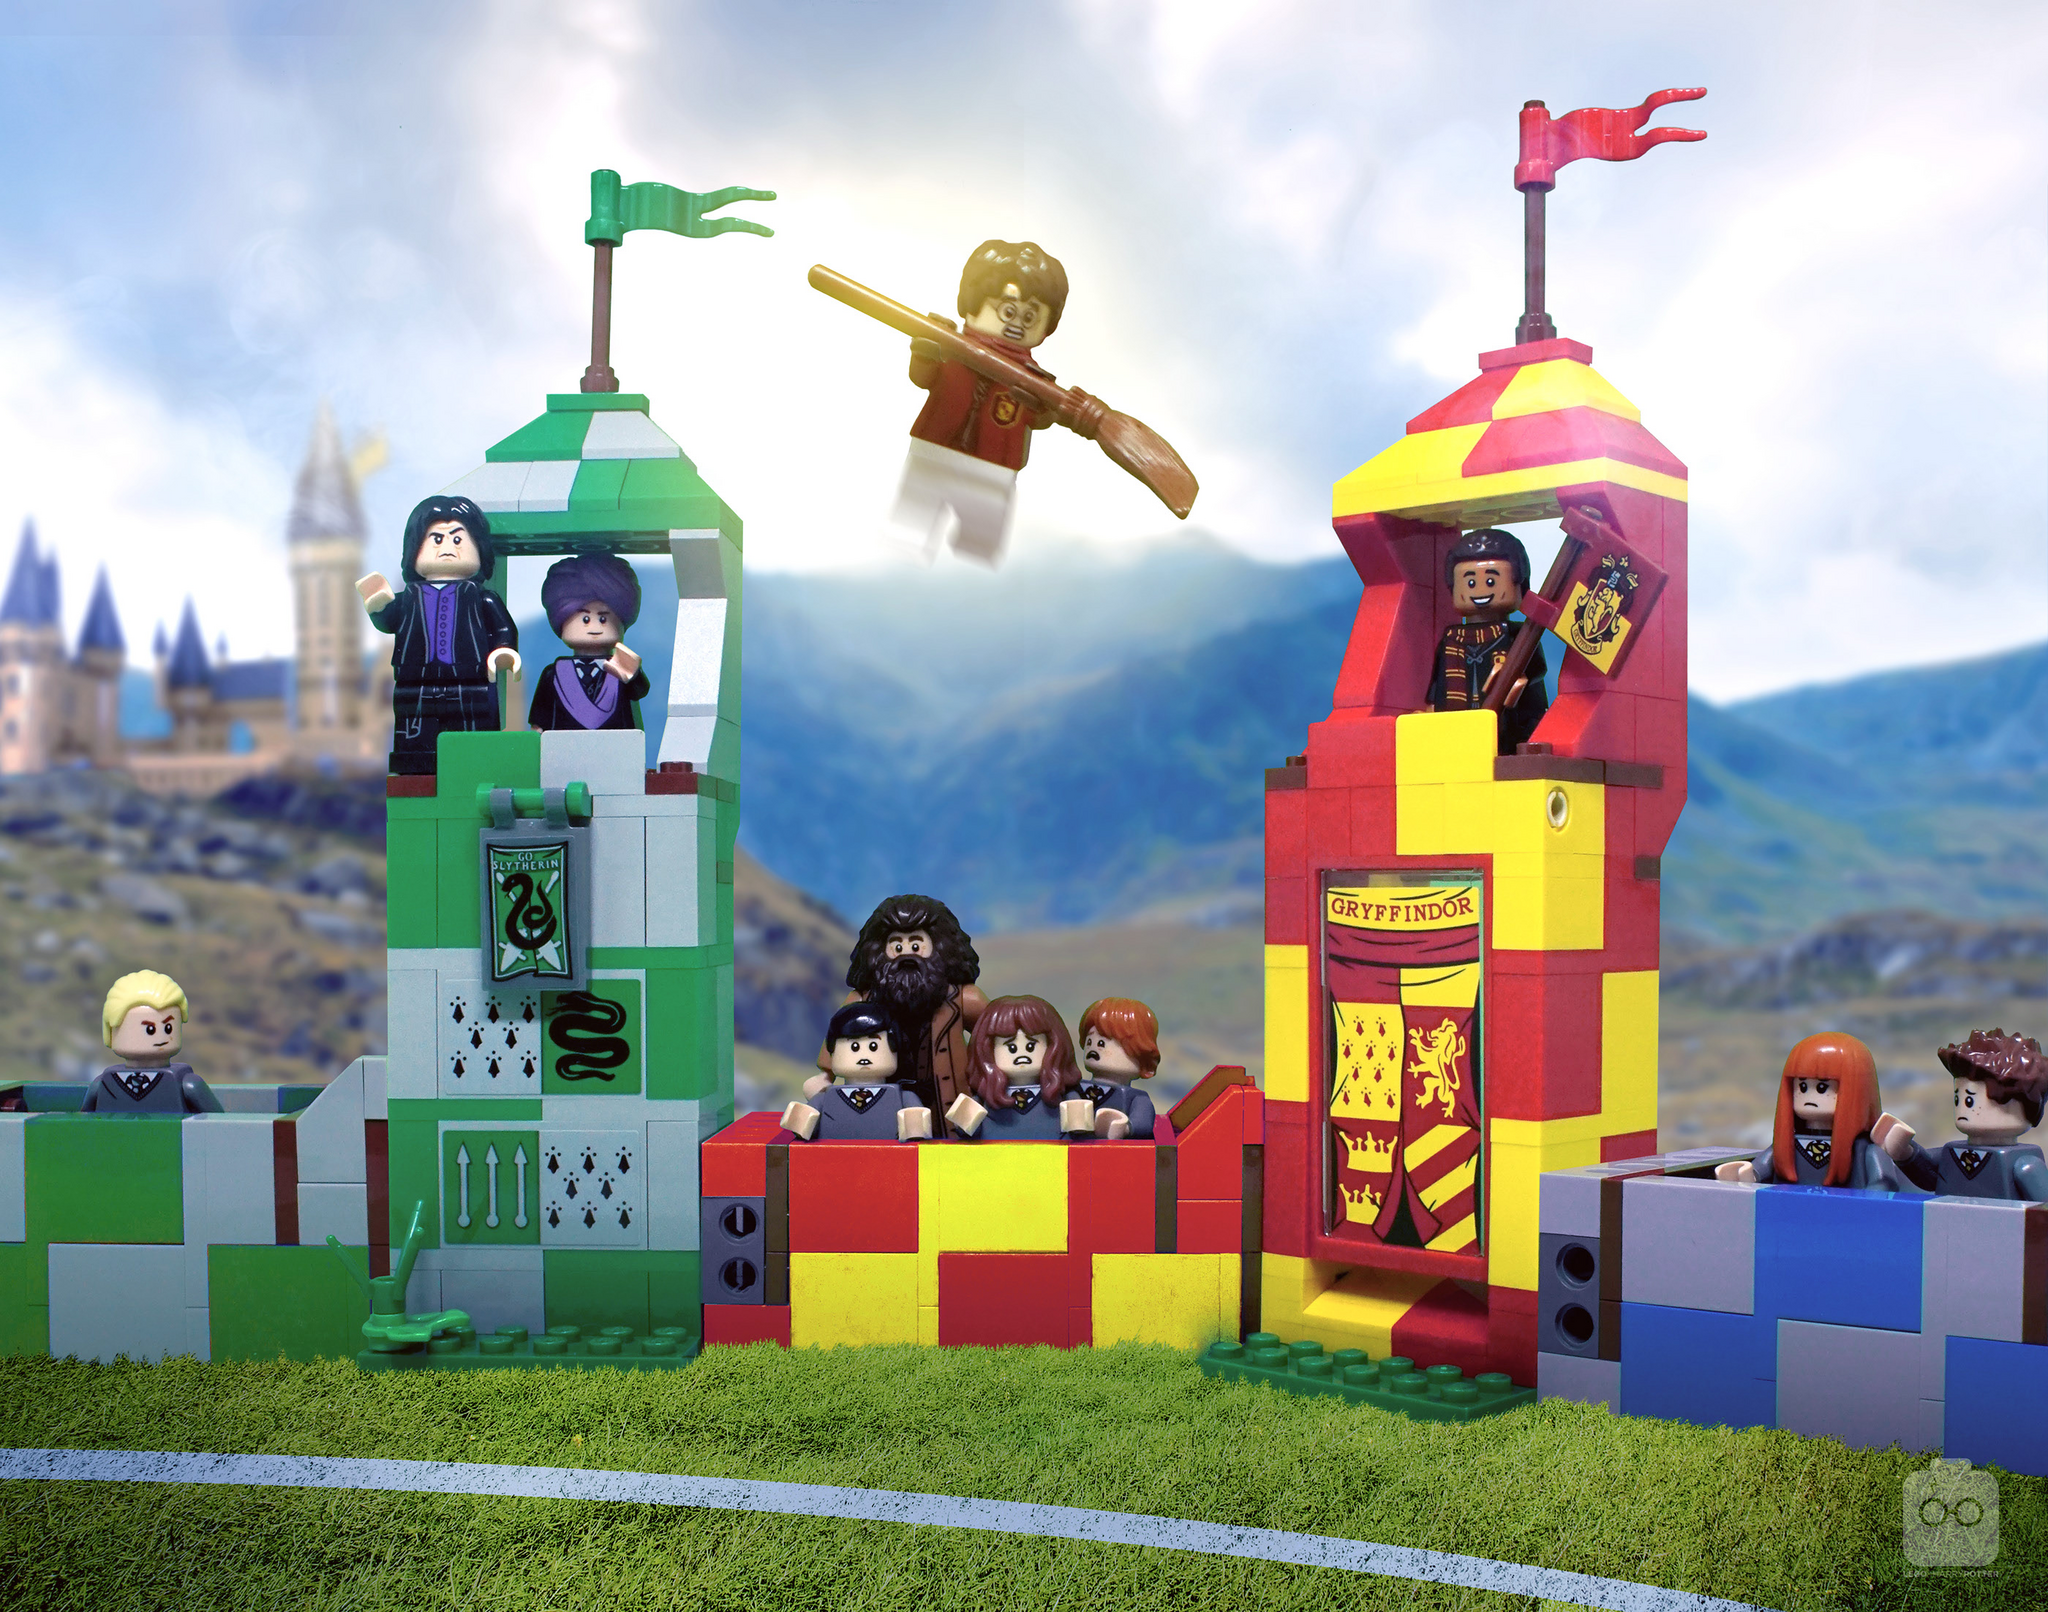 LEGO story of a boy who survived. - Lego, Harry Potter, Albus Dumbledore, Minerva McGonagall, Ron Weasley, Distribution hat, Призрак, Mirror Einalezh, Professor Quirrell, Hermione, Hagrid, Quidditch, Severus Snape, Longpost, Harry Potter and the Philosopher's Stone